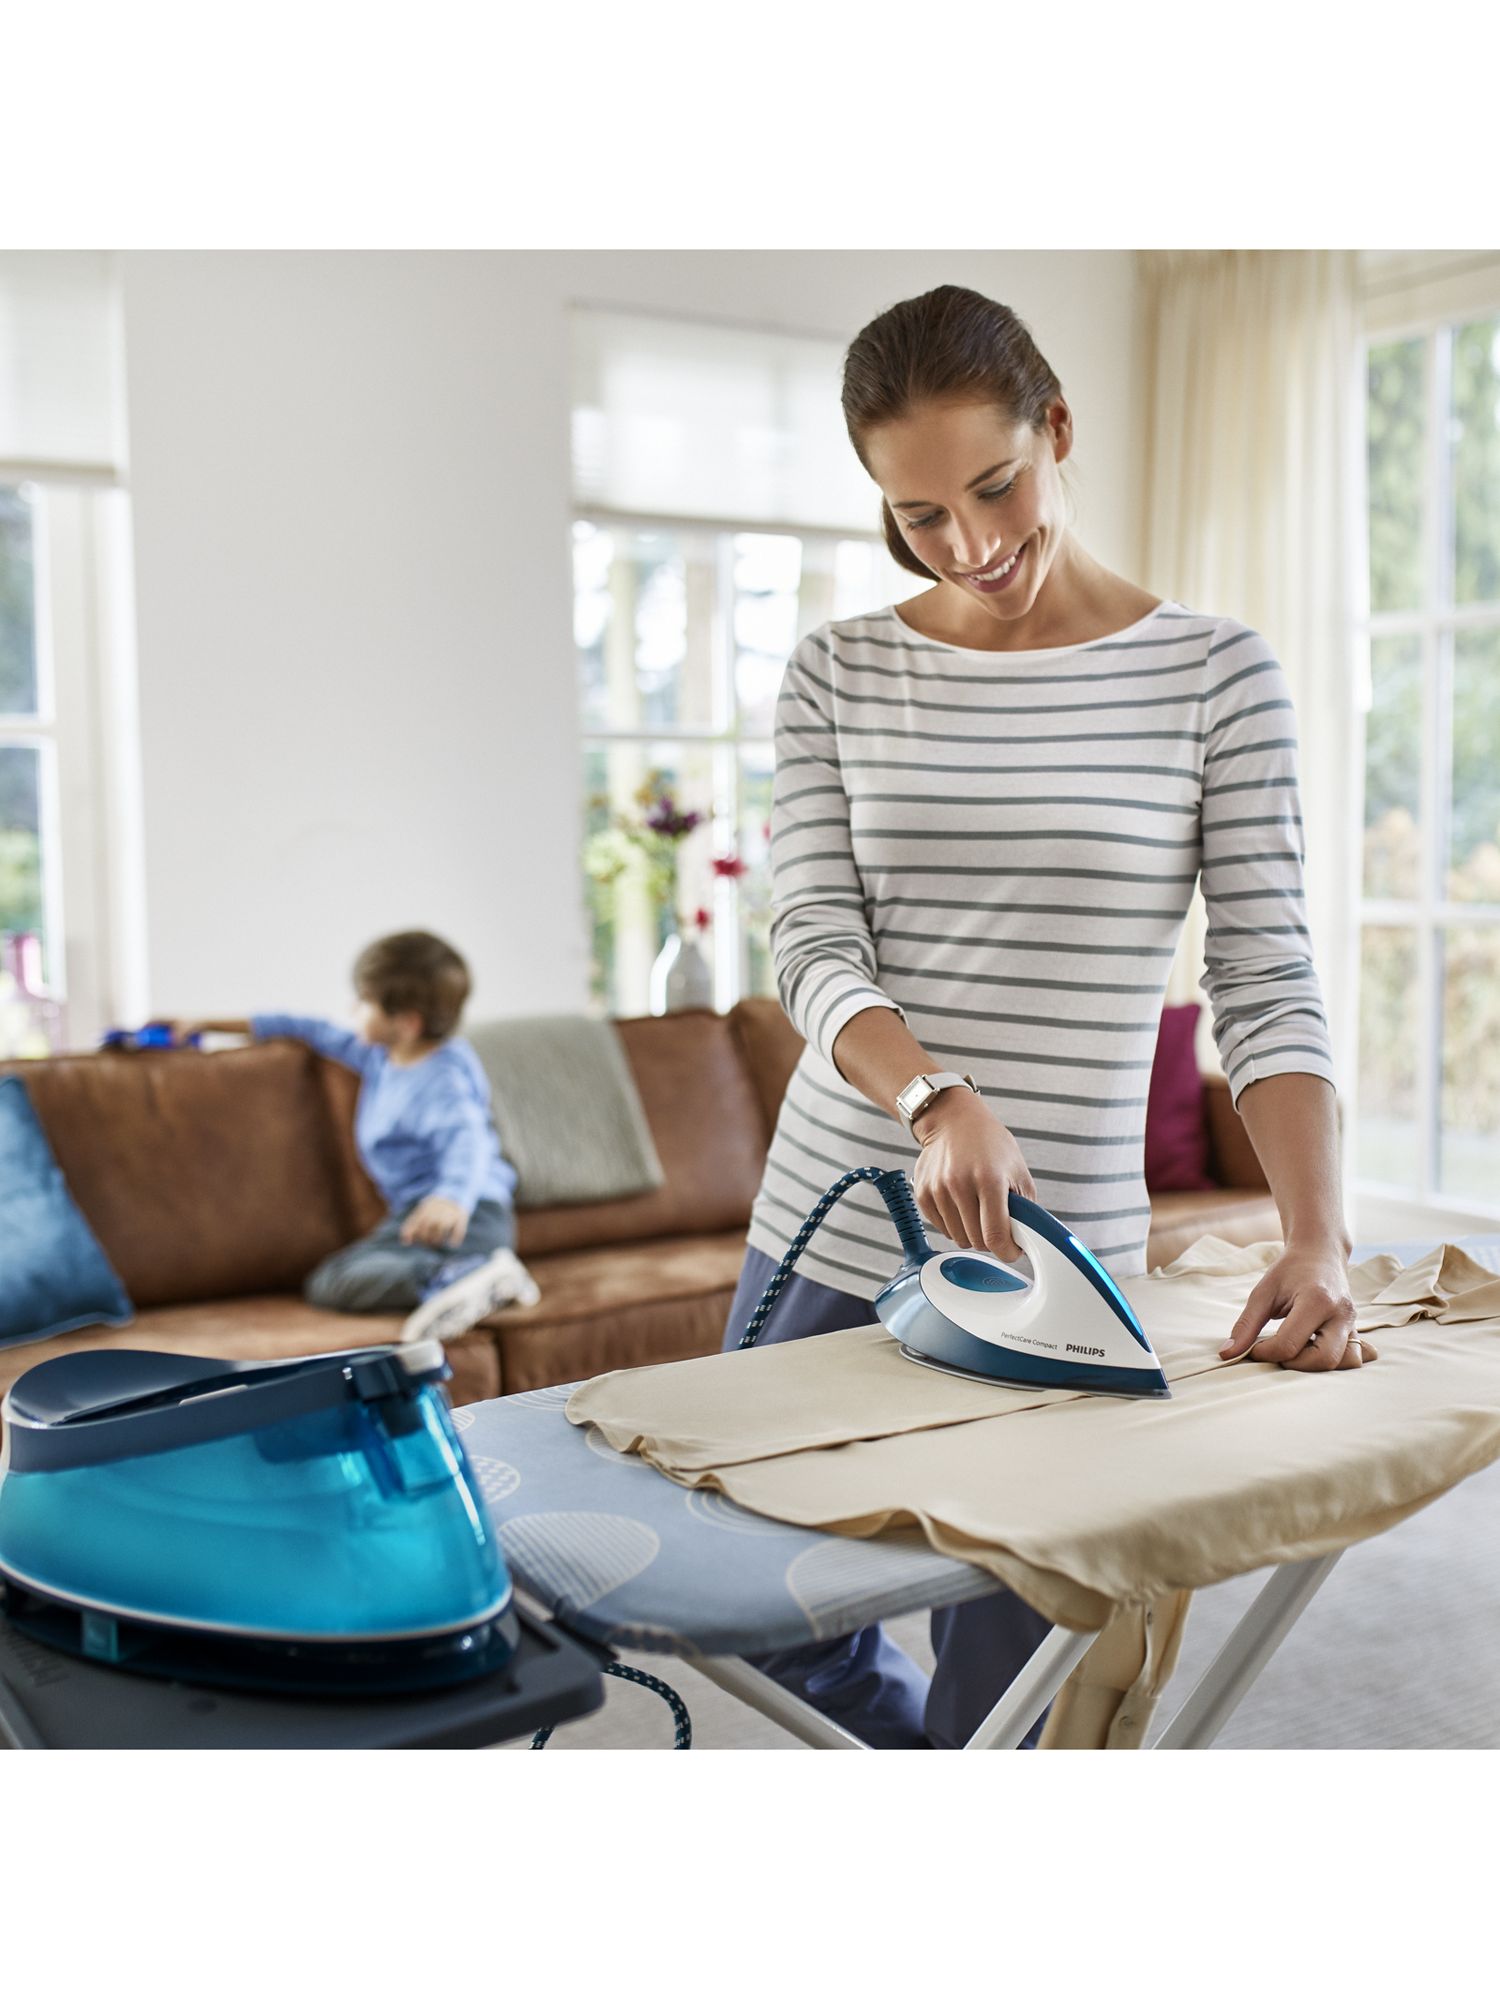 2400 W Blue and White Philips PerfectCare Compact Steam Generator Iron with 400 g Steam Boost GC7840/26 